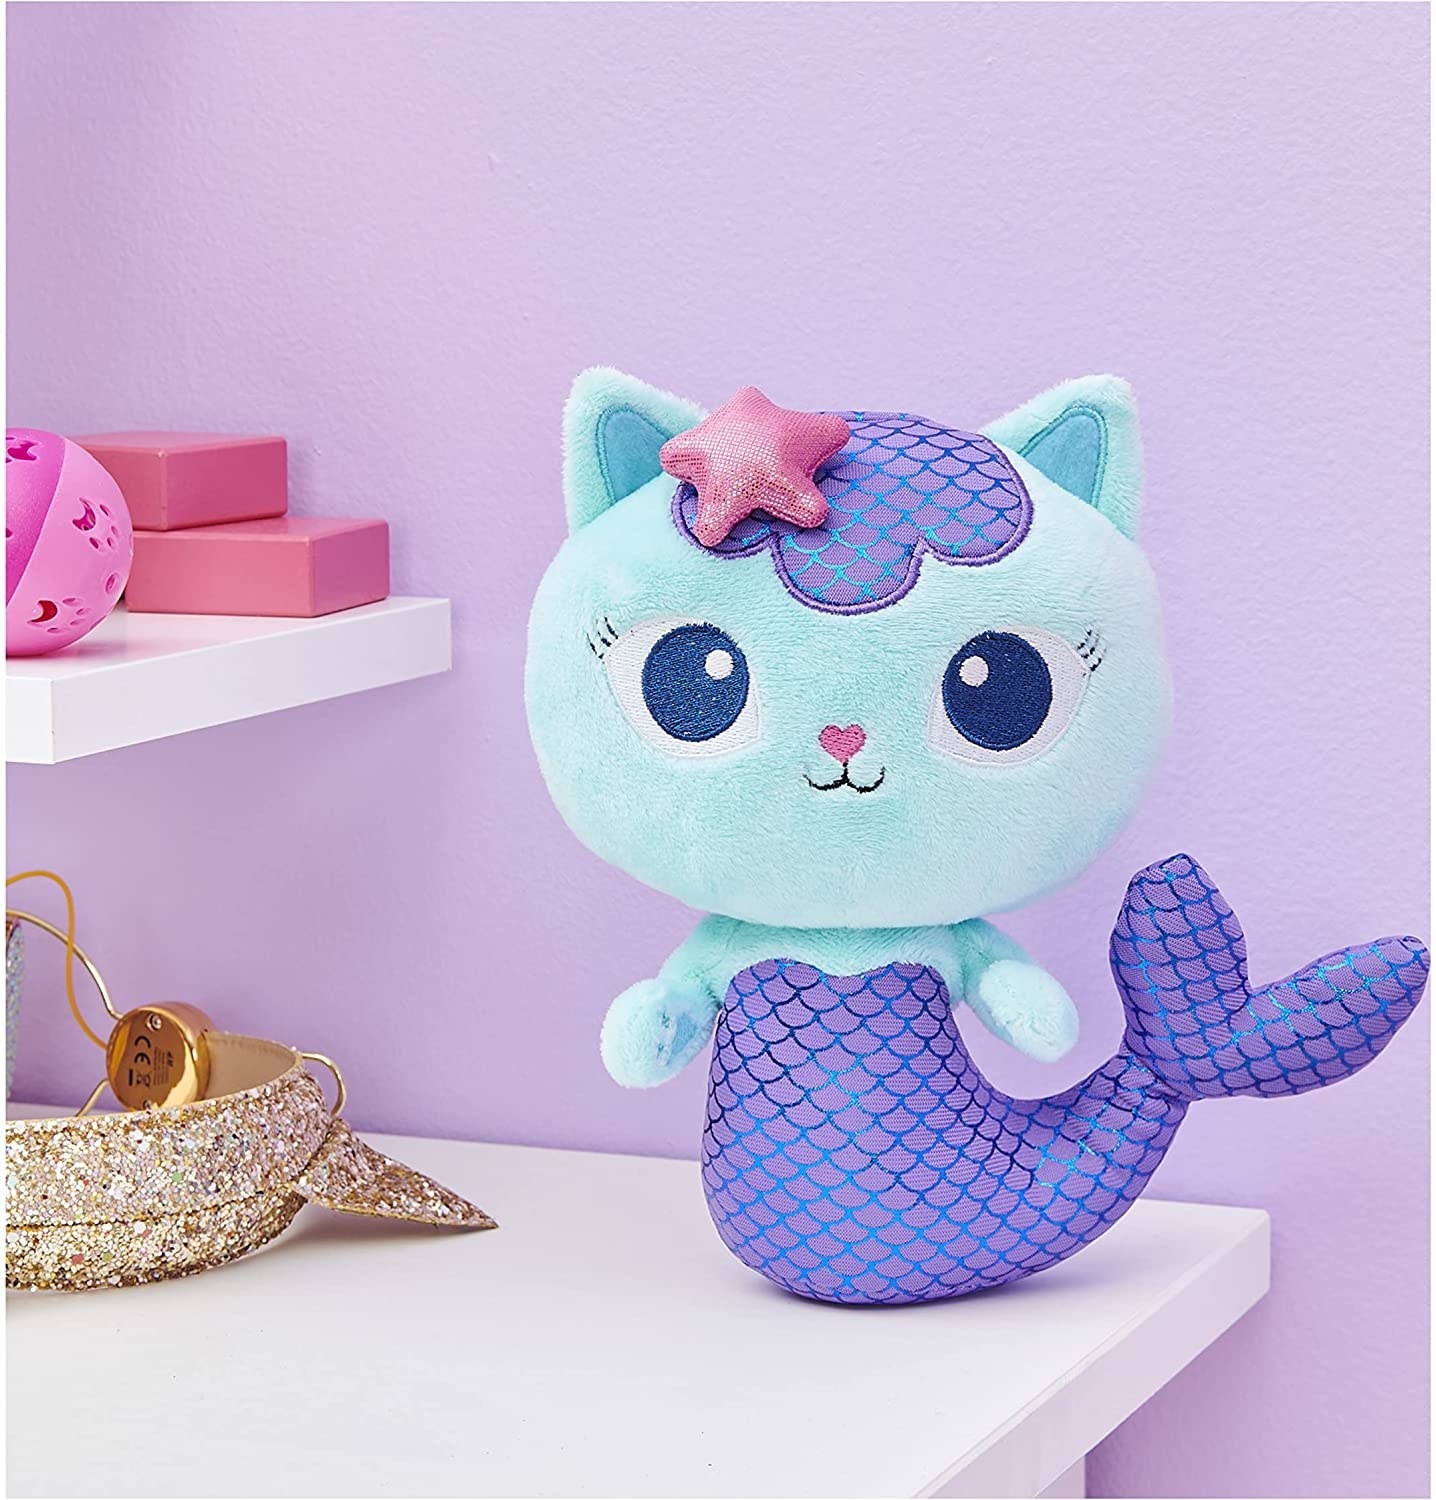 The purple and blue cat mermaid plush toy